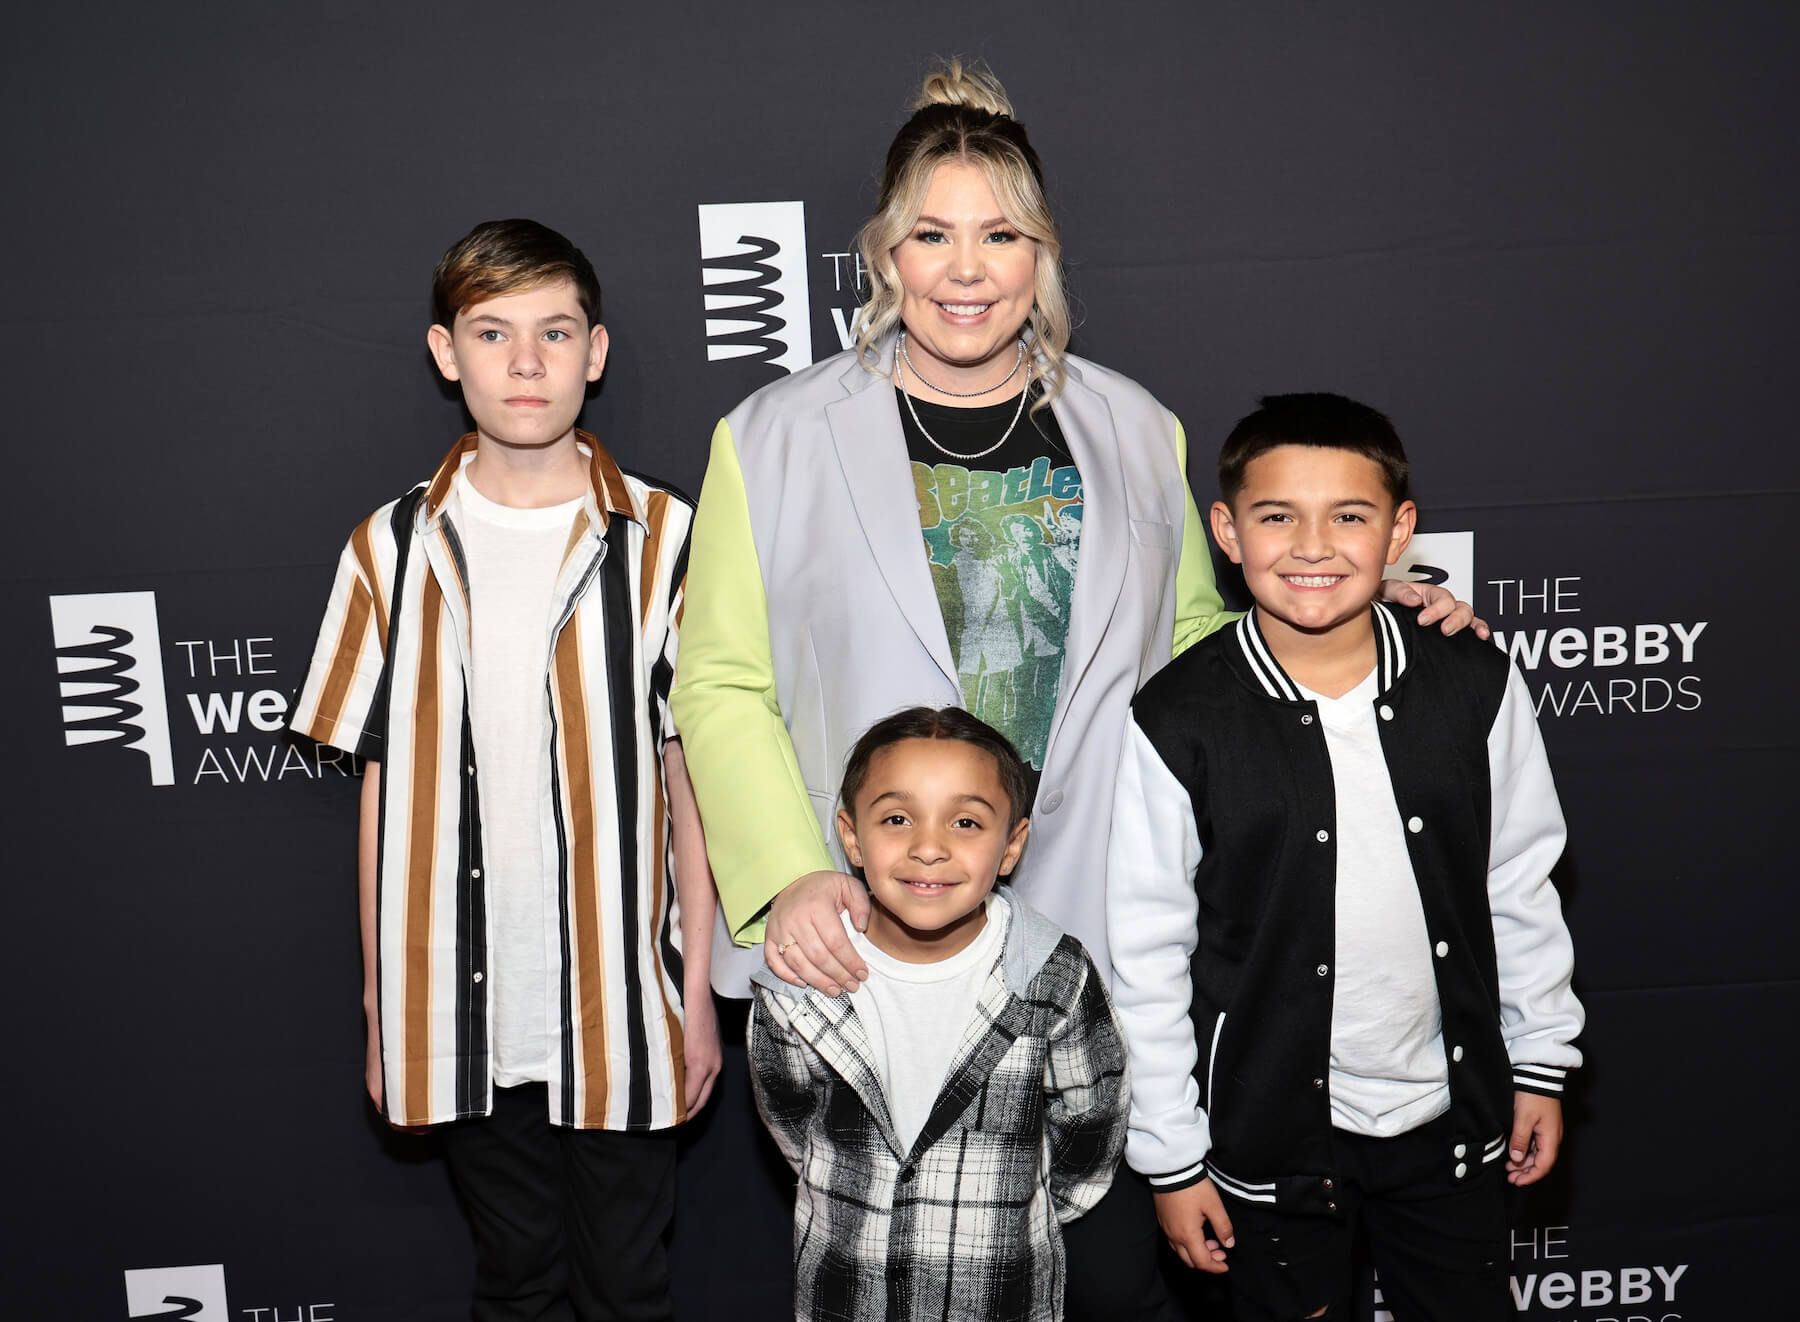 'Teen Mom 2' star Kailyn Lowry with 3 of her kids smiling at an event